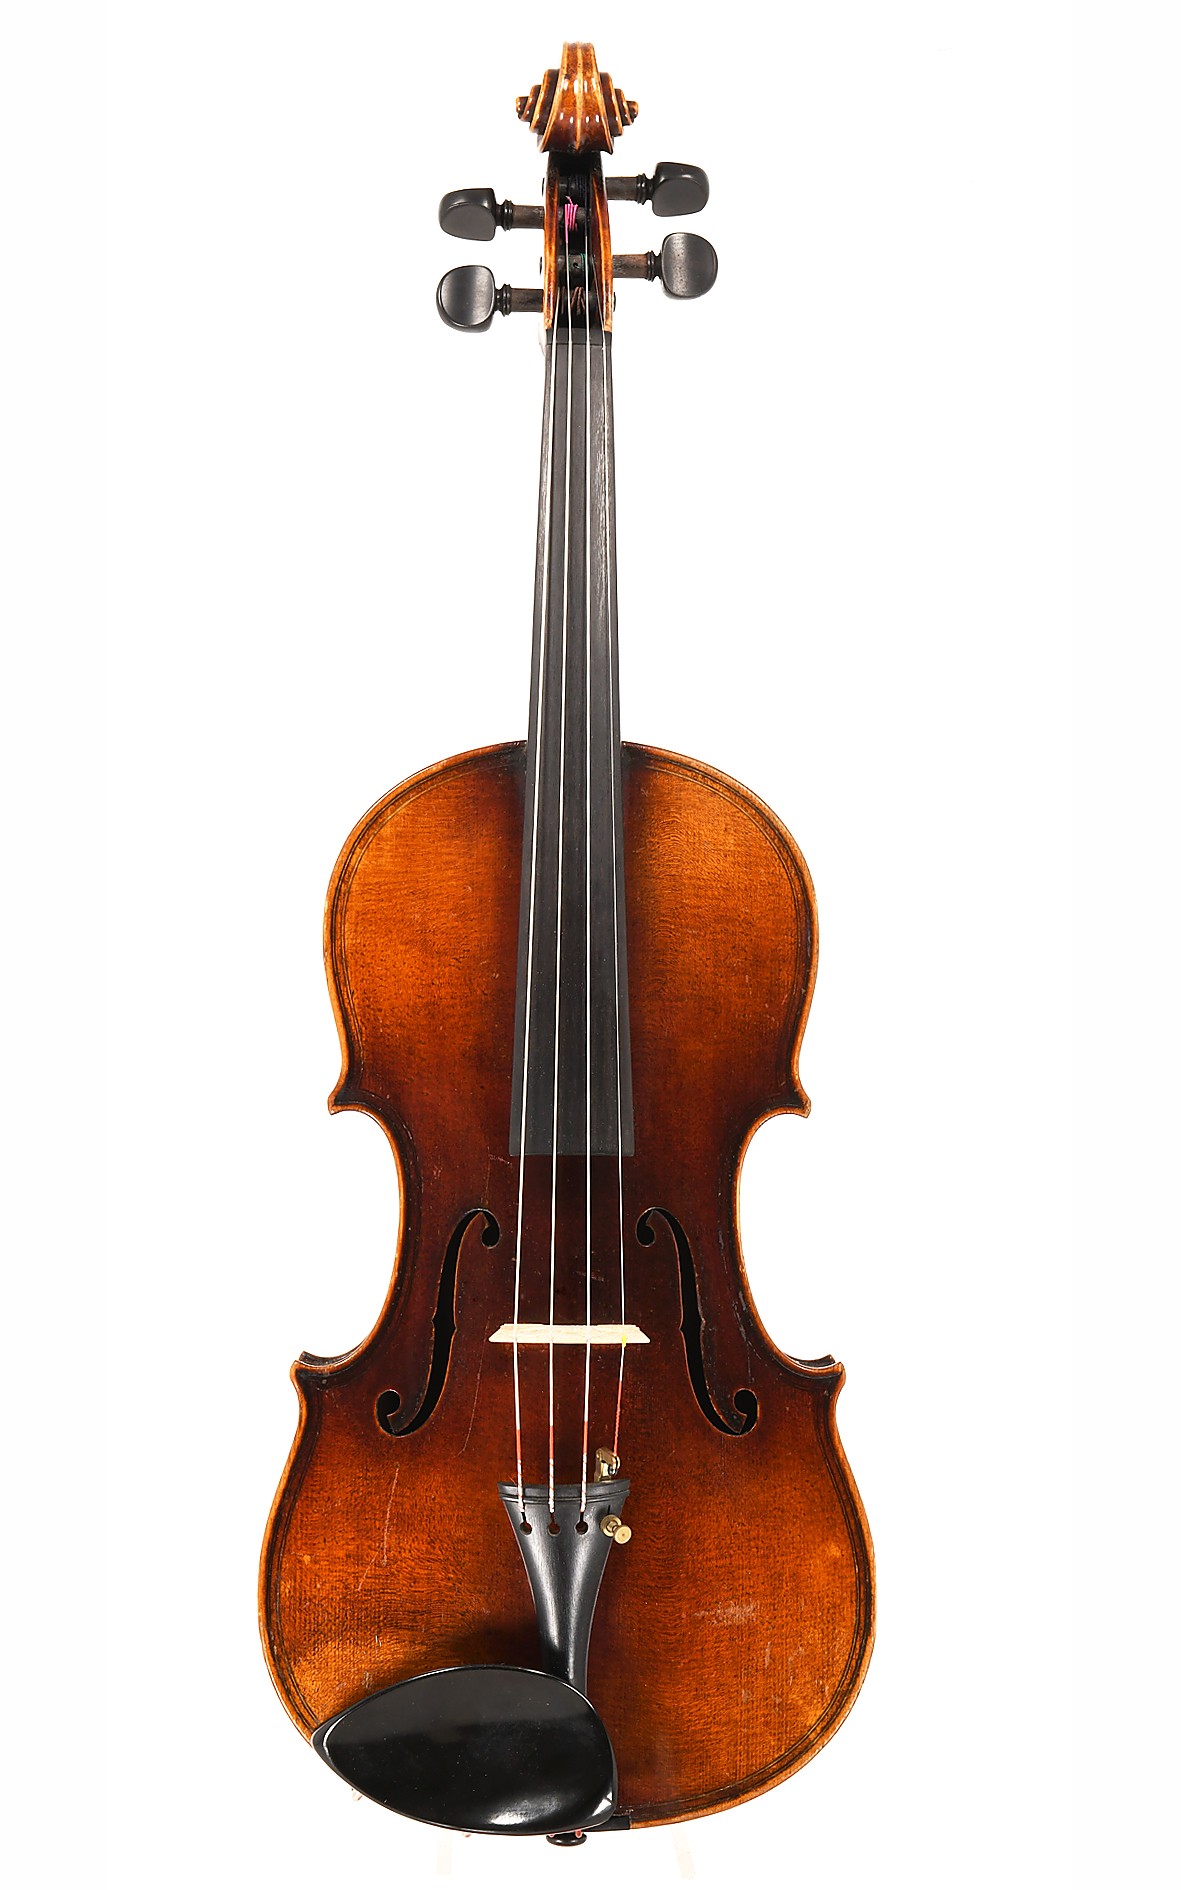 Antique Markneukirchen violin, circa 1900, with orante edge and an extra winding of the scroll